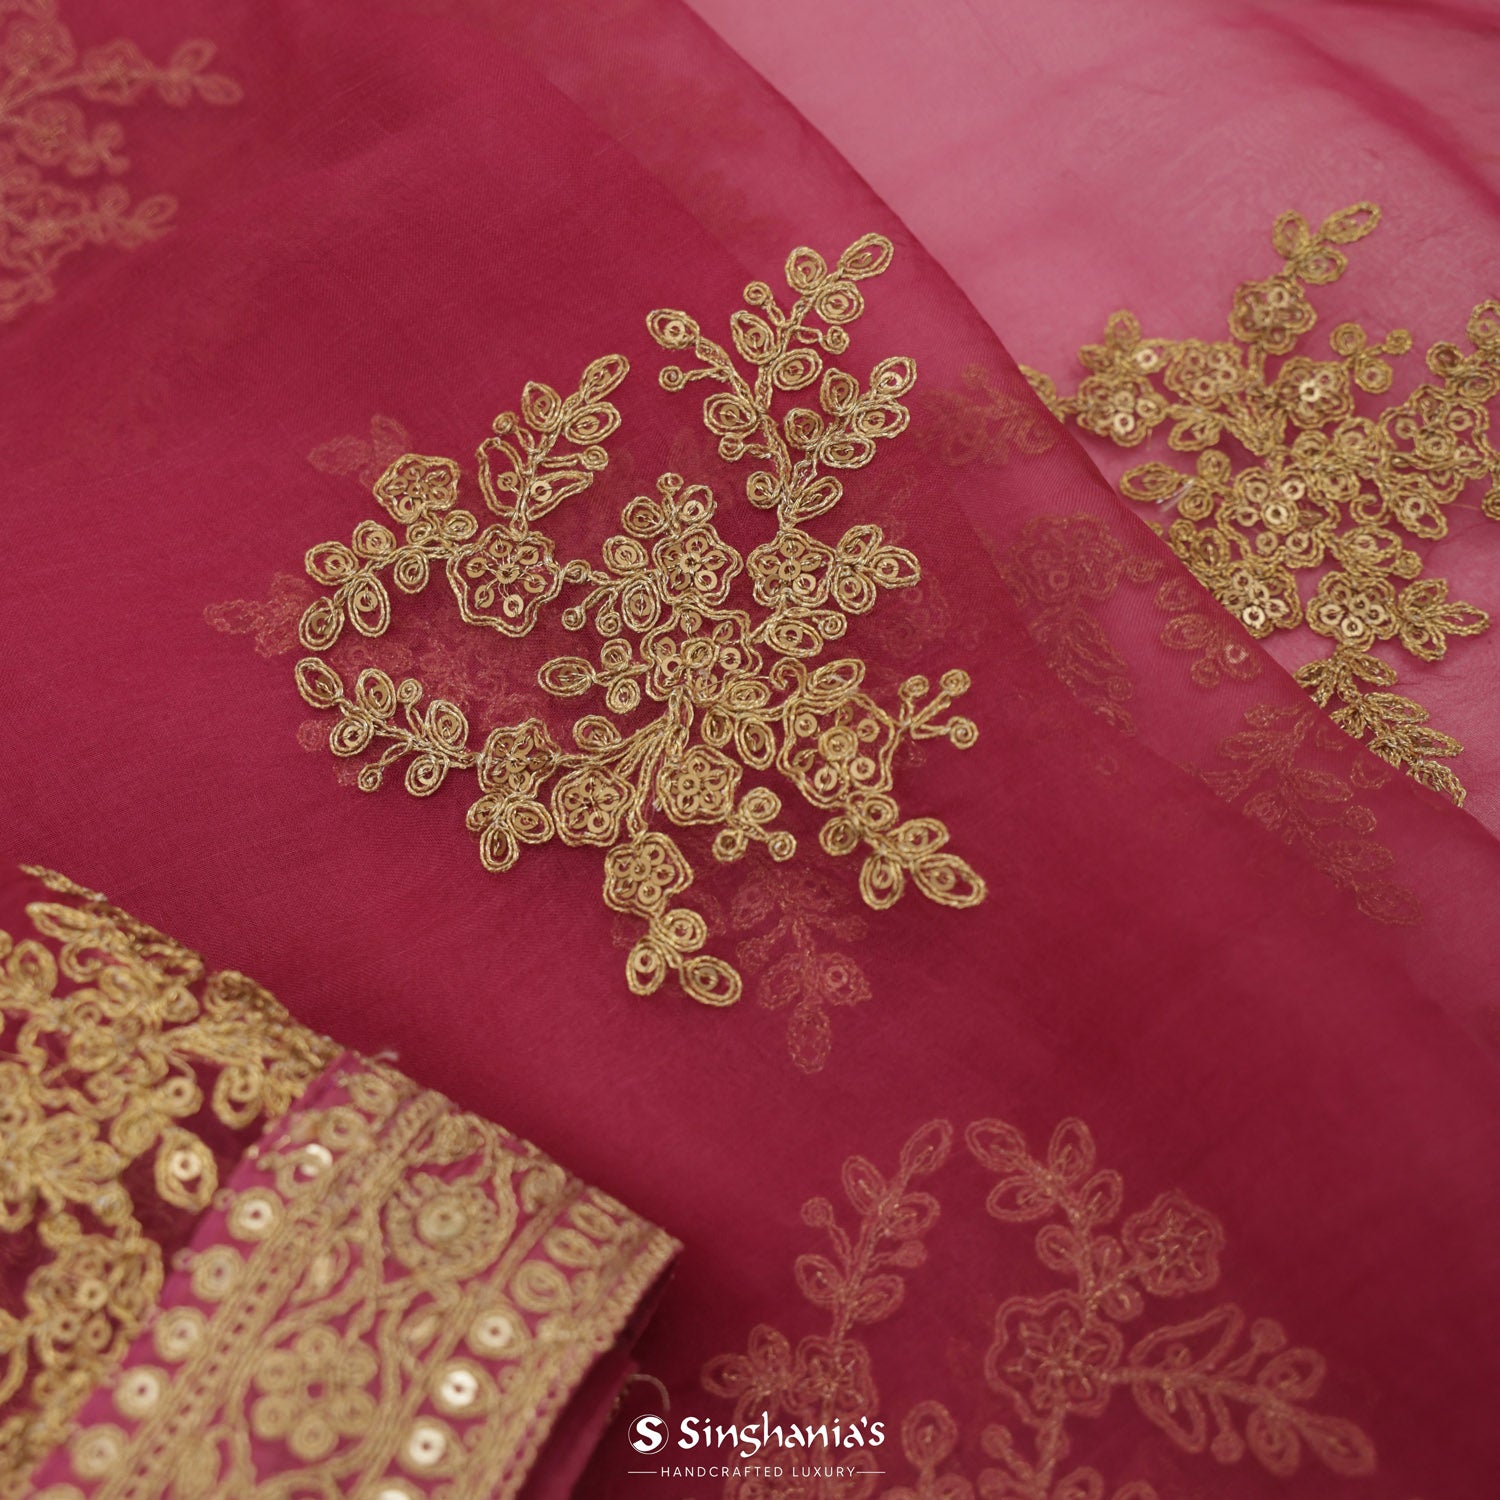 Rouge Pink Printed Organza Saree With Floral Pattern